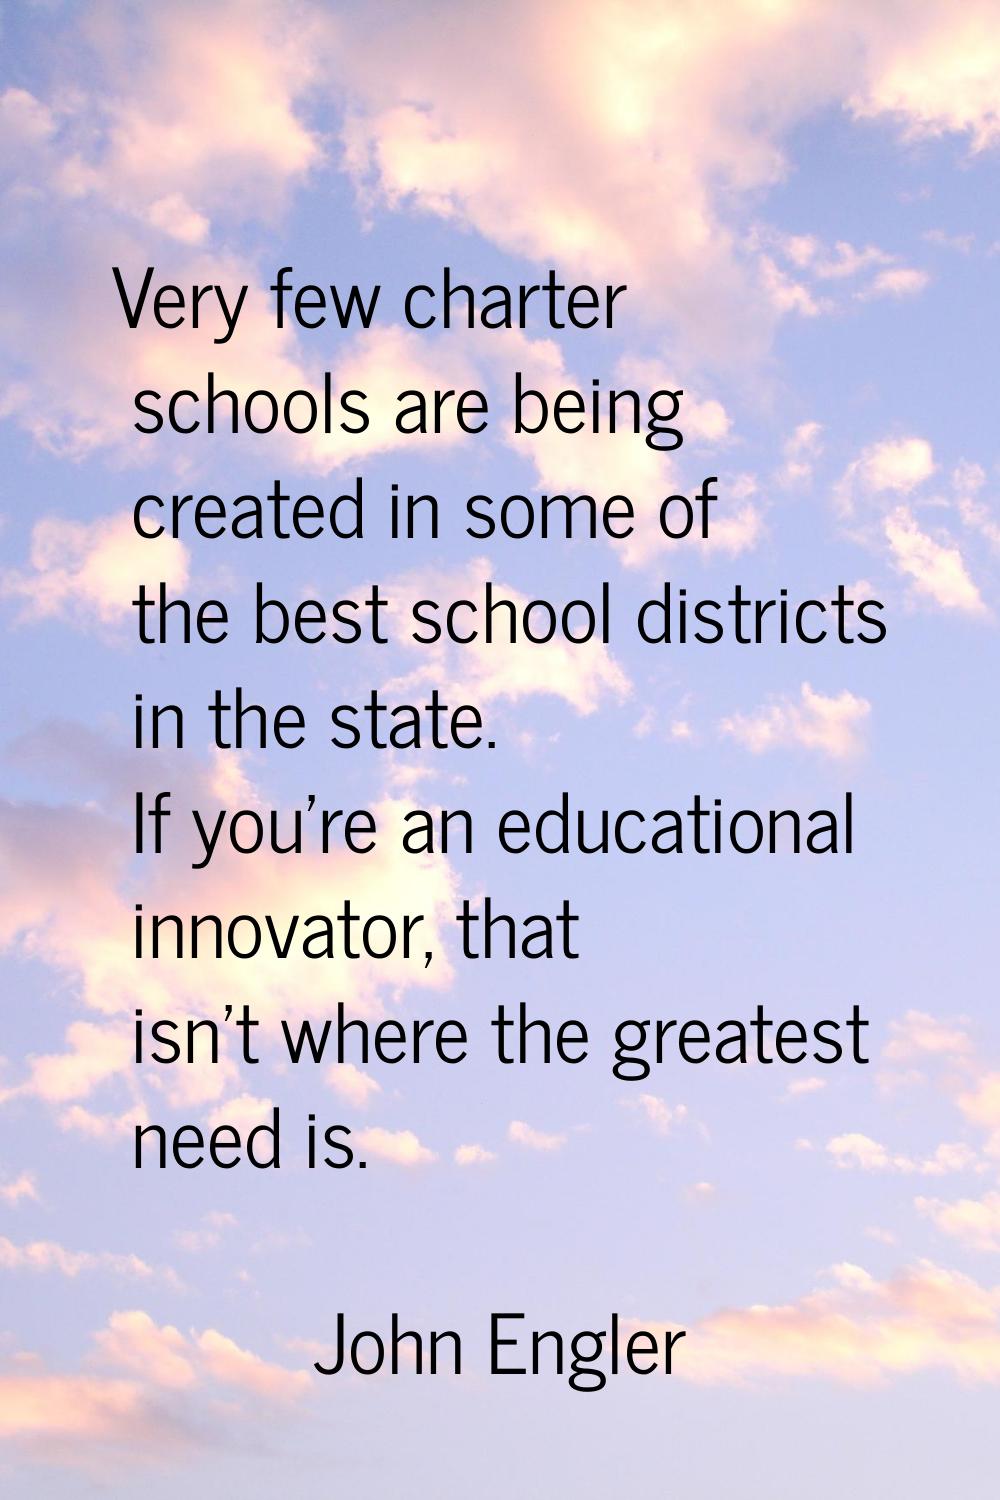 Very few charter schools are being created in some of the best school districts in the state. If yo